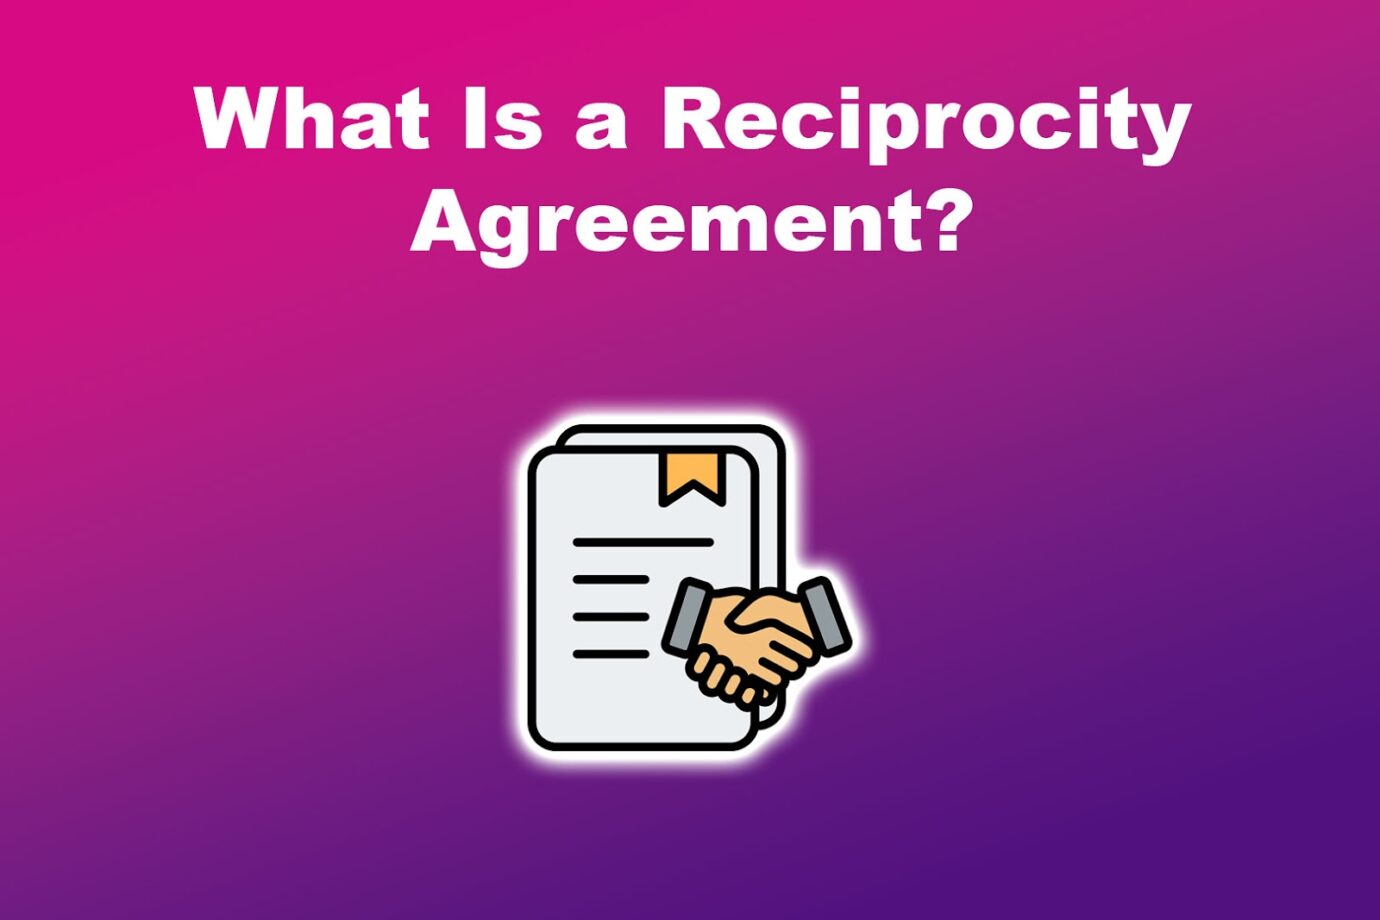 What Is a Reciprocity Agreement?